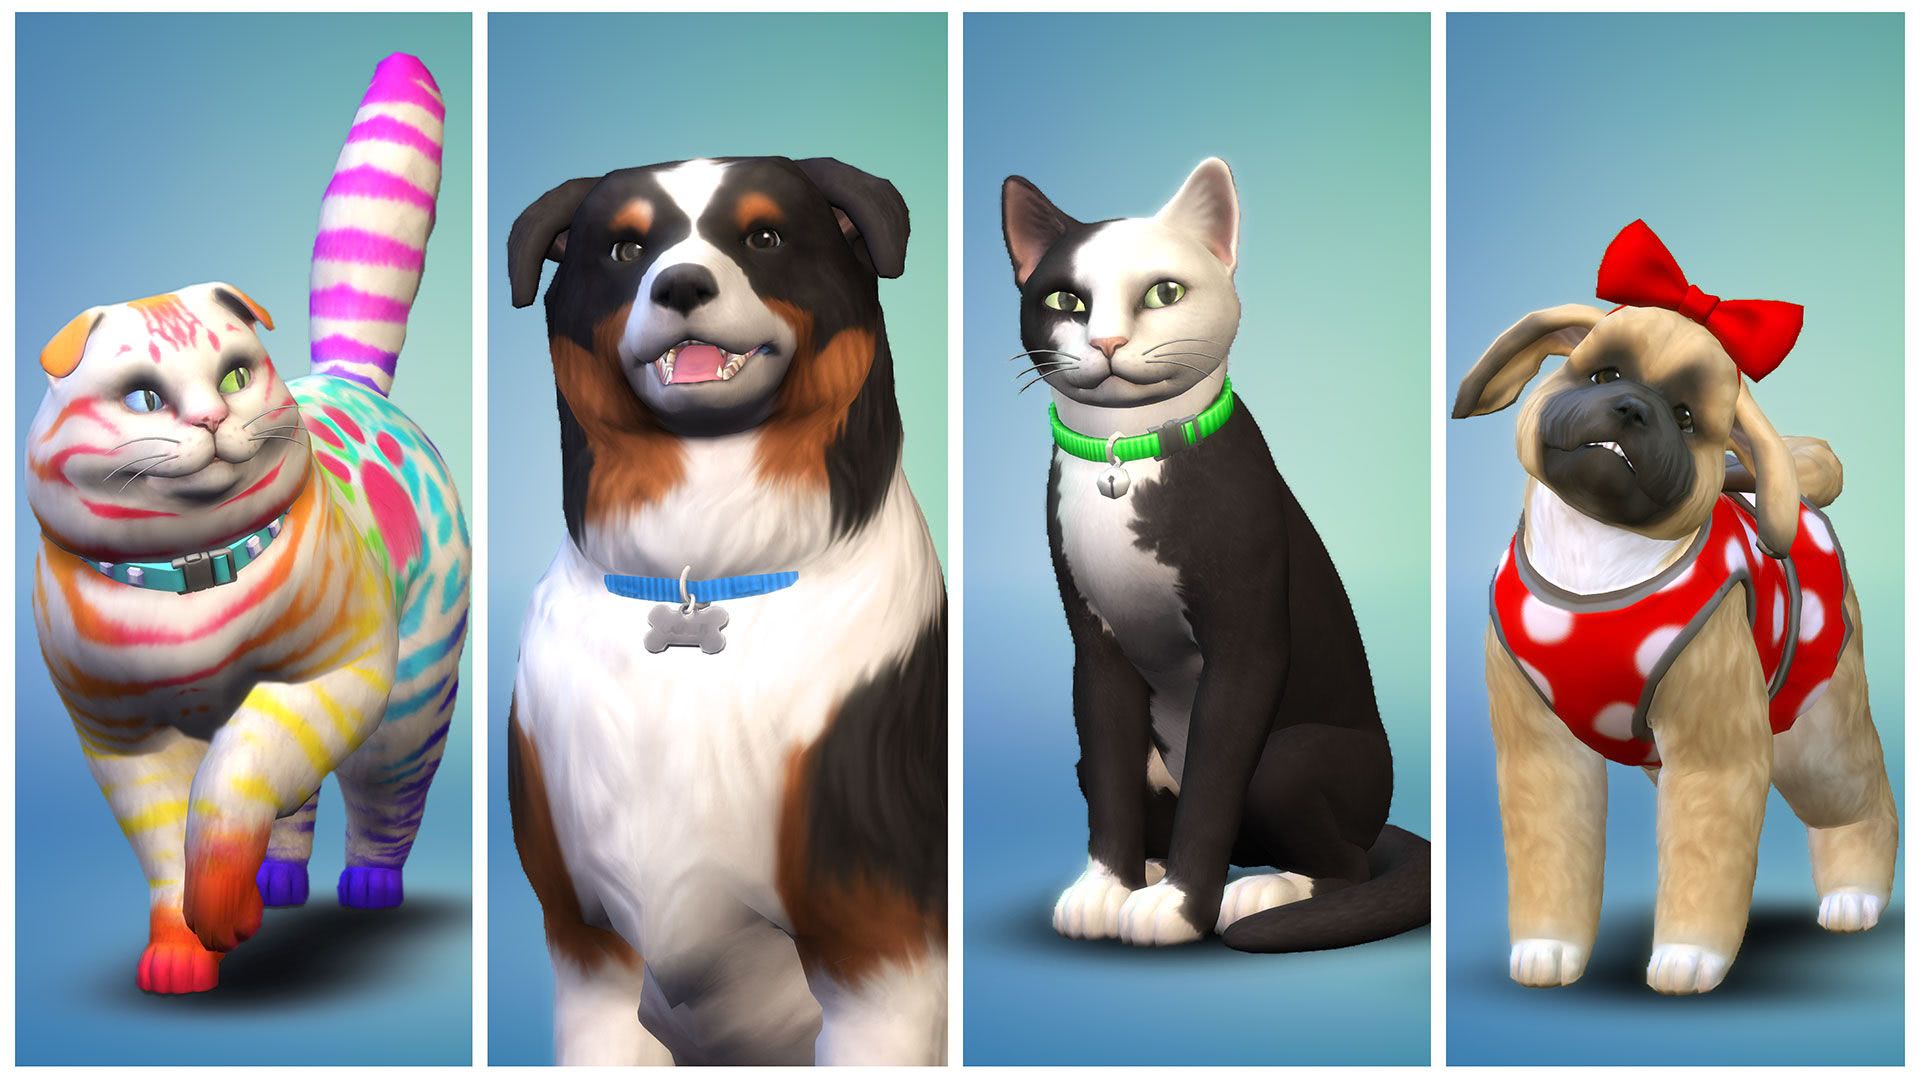 Buy The Sims 4: Cats & Dogs (Xbox One)